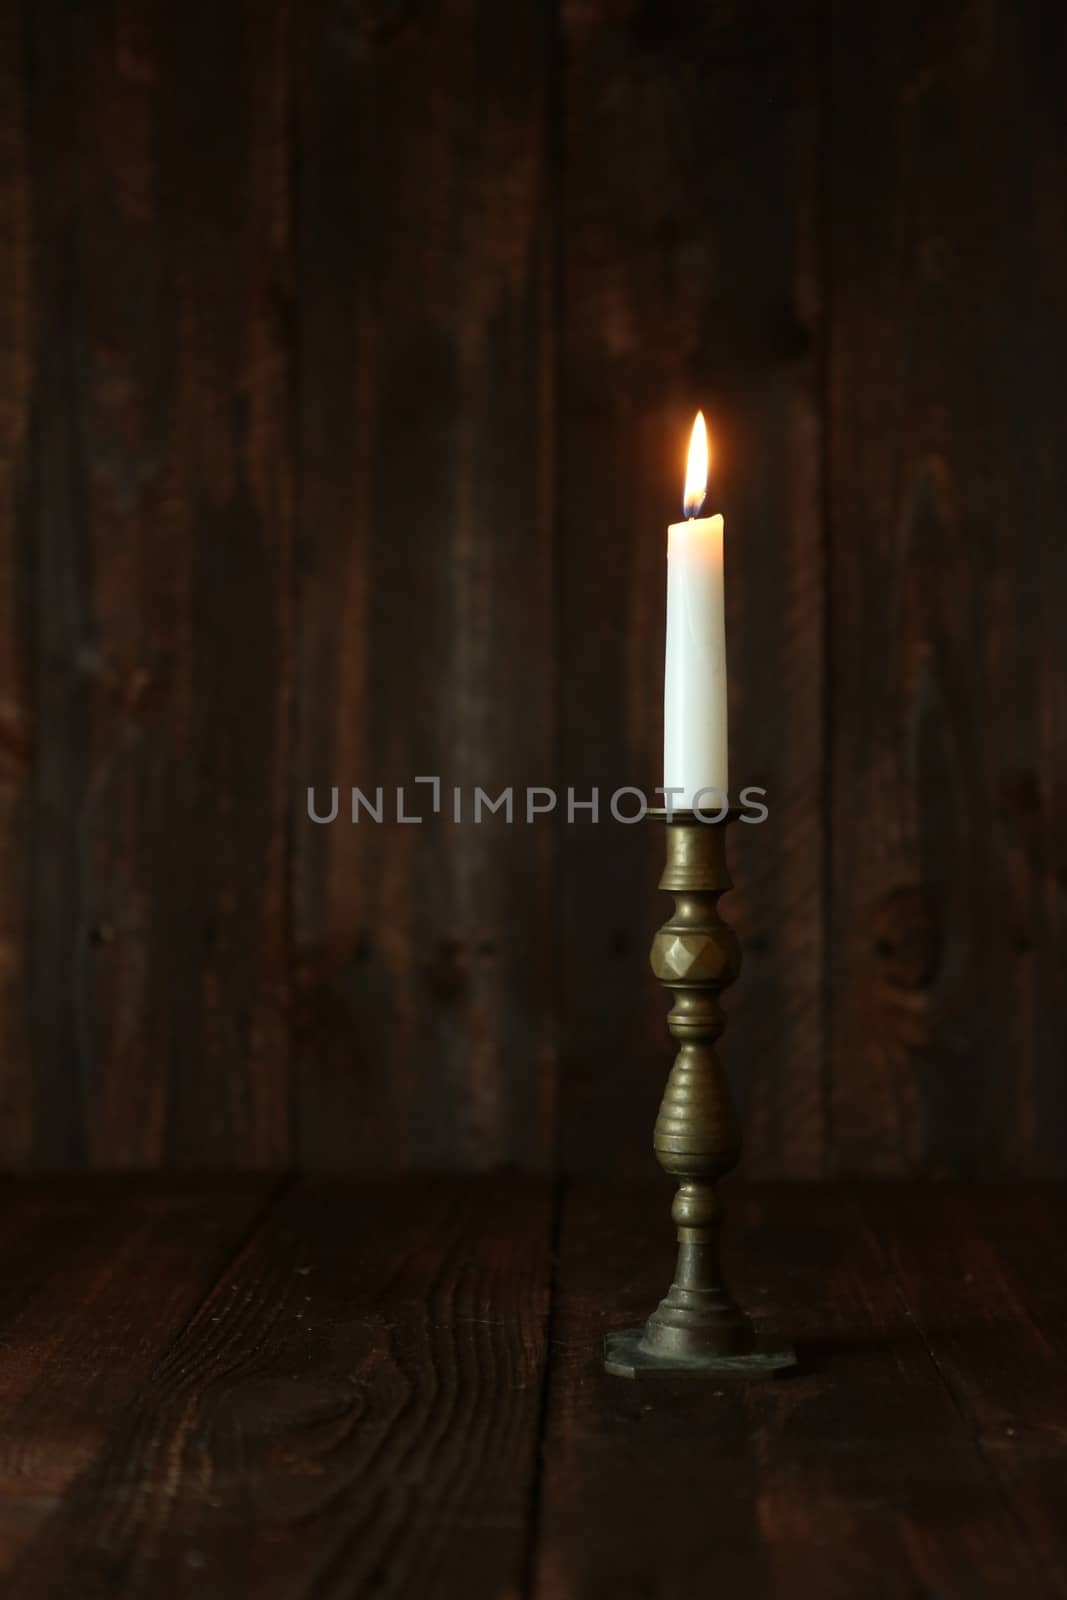 Lit Candle on an Old Wooden Rustic Background by tobkatrina